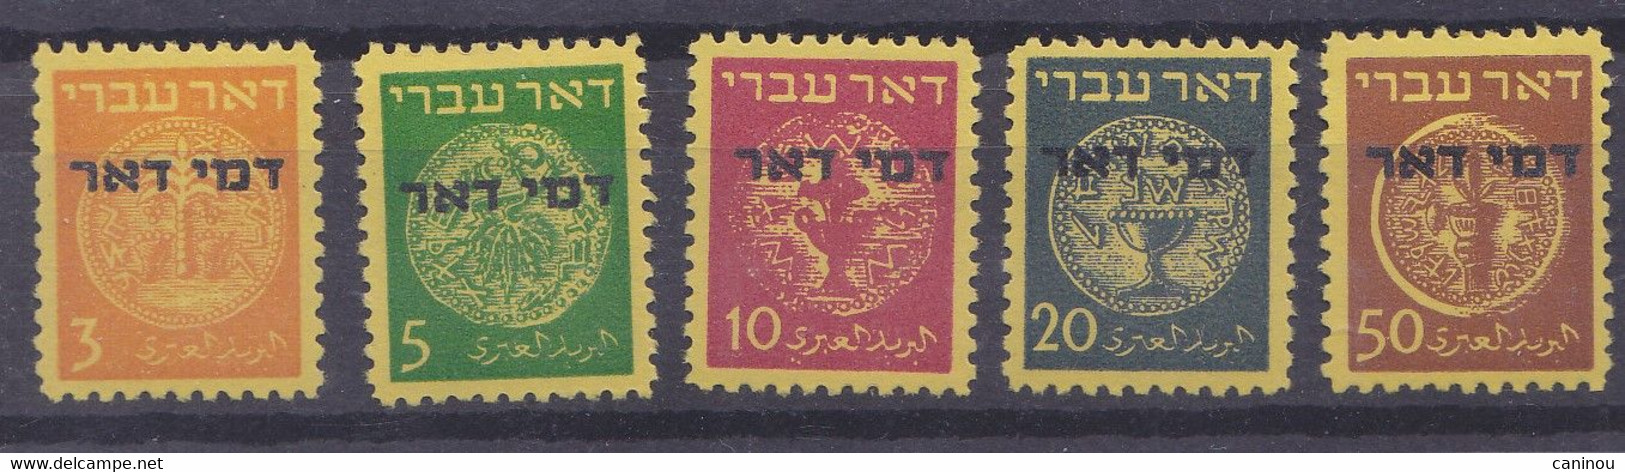 ISRAEL TIMBRES TAXE 1948 Y & T 1-5 MONNAIES ANCIENNES NEUFS TRACES CHARNIERES - Postage Due